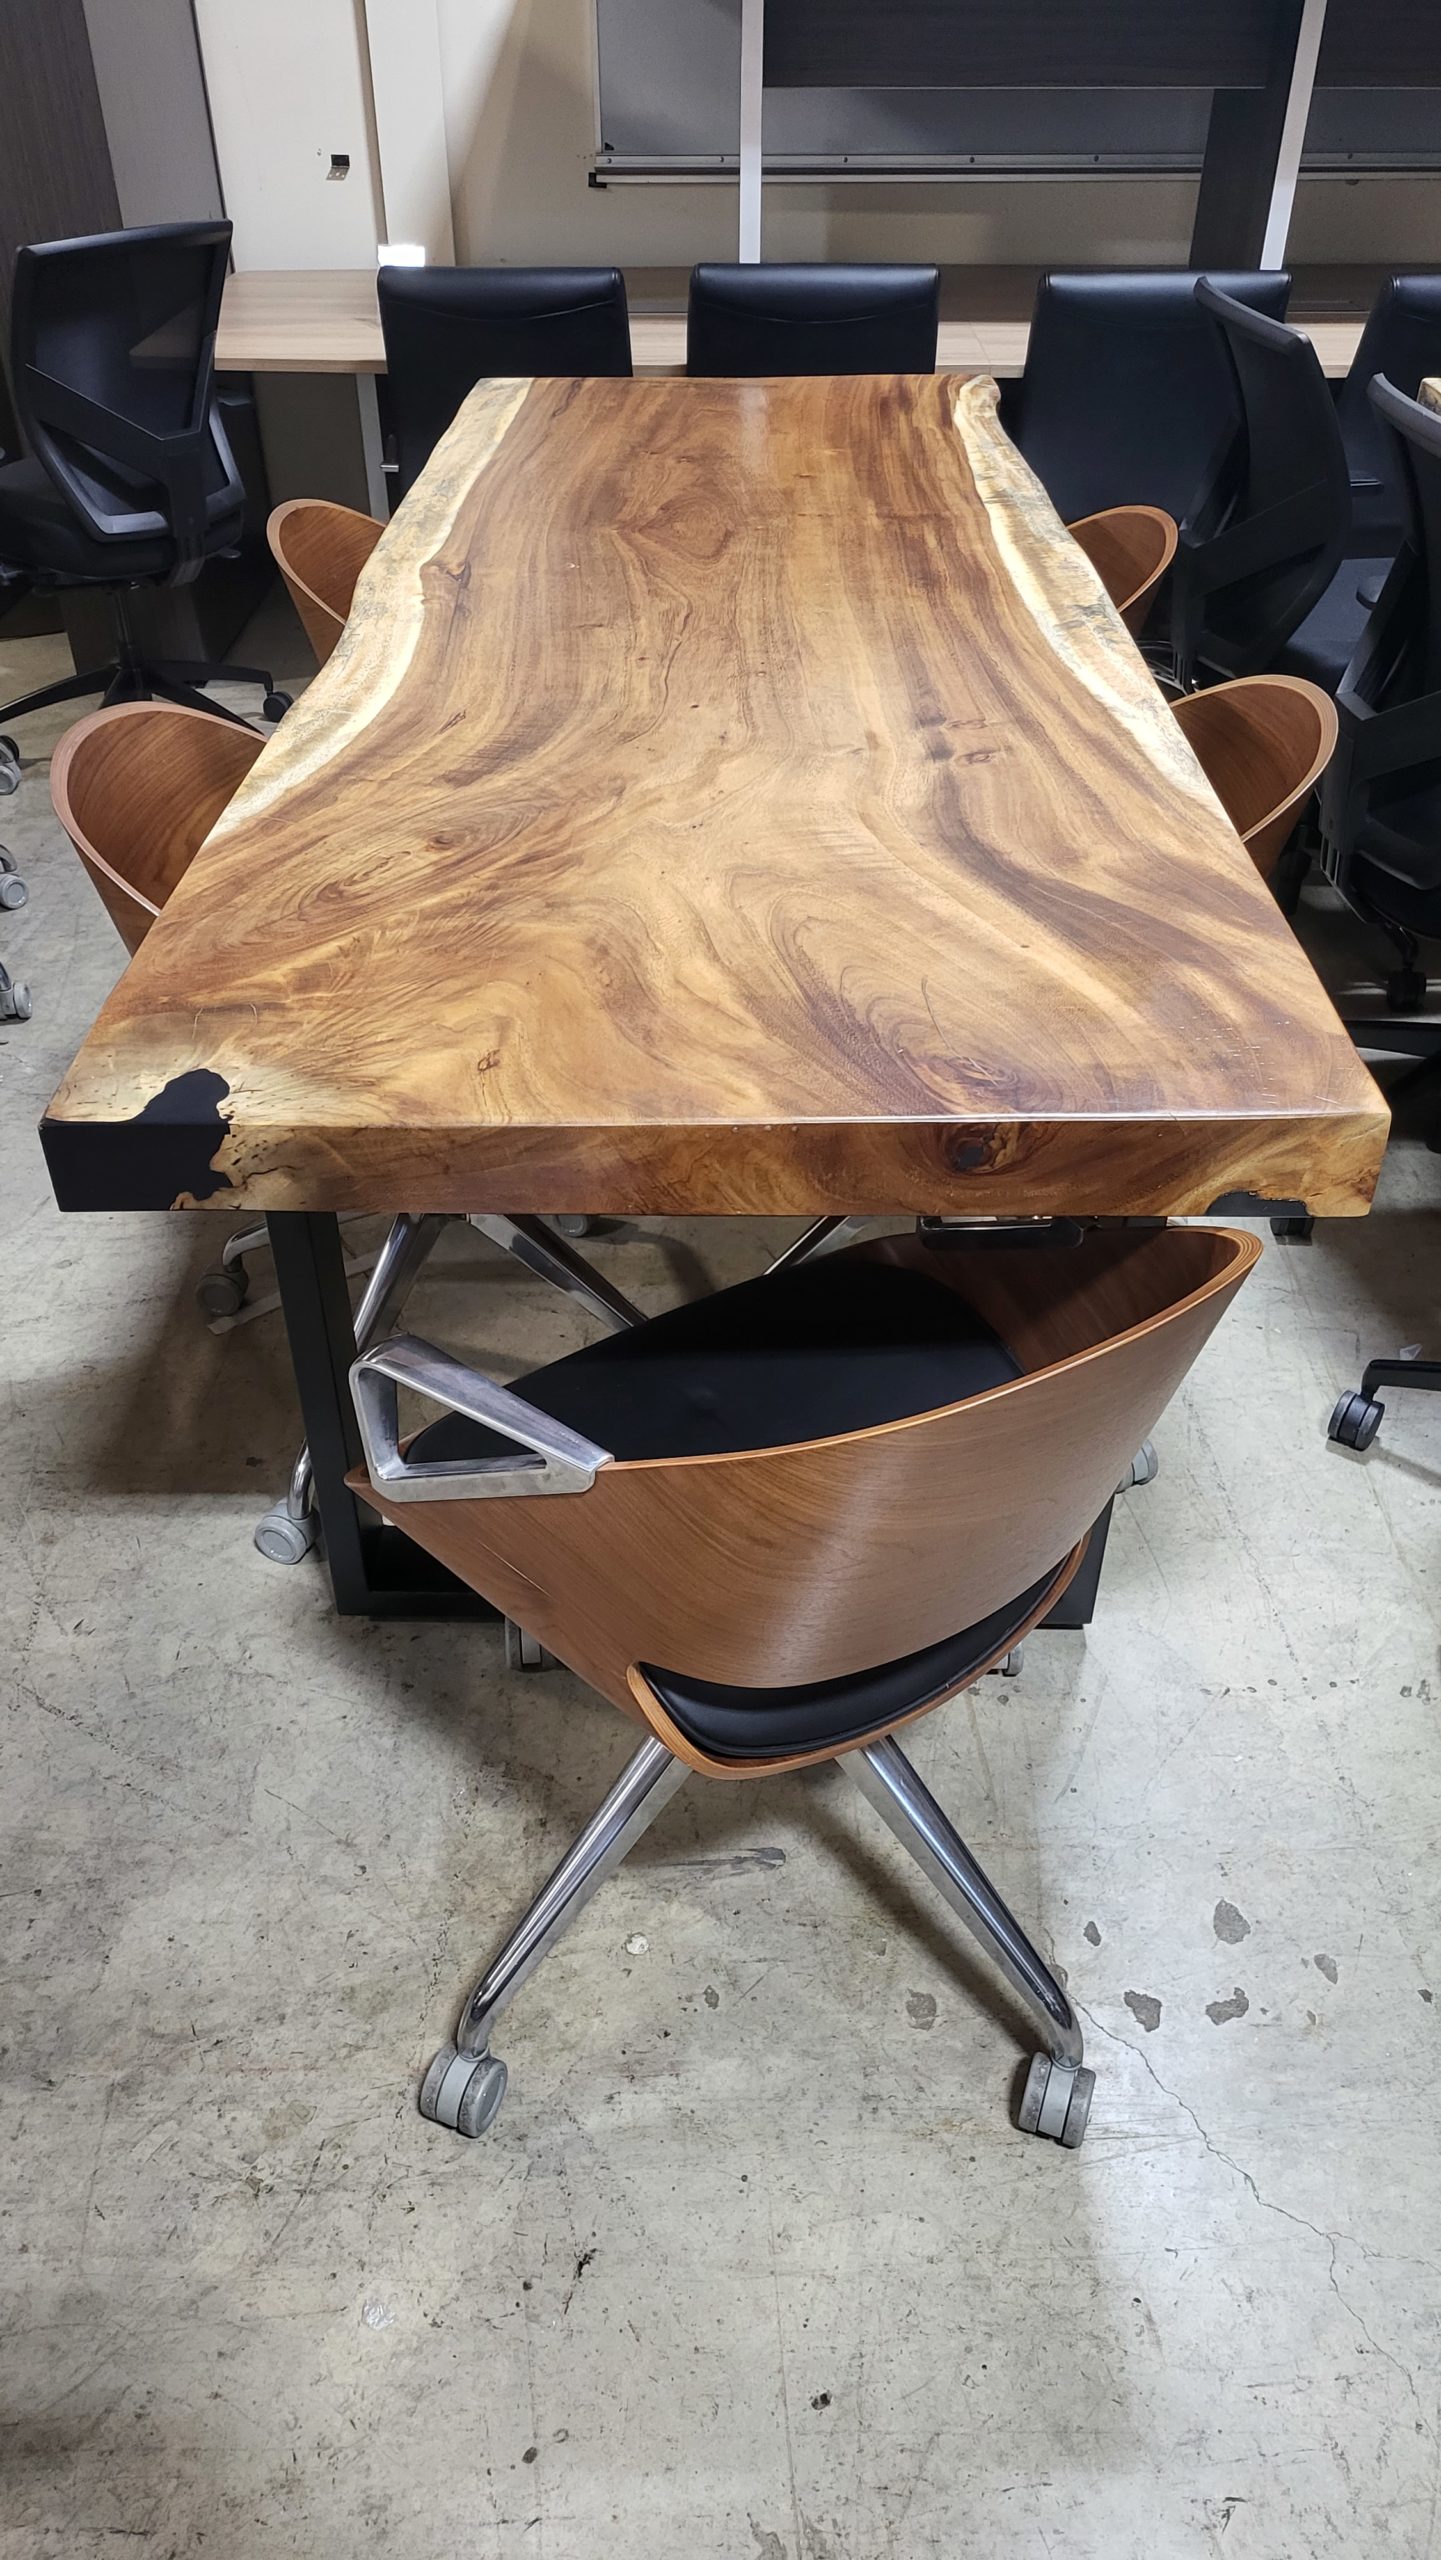 Live Edge Conference Table - Parota Wood Slab Dining Table - 96 - Smart  Buy Office Furniture: Office Furniture Austin - Used Office Furniture